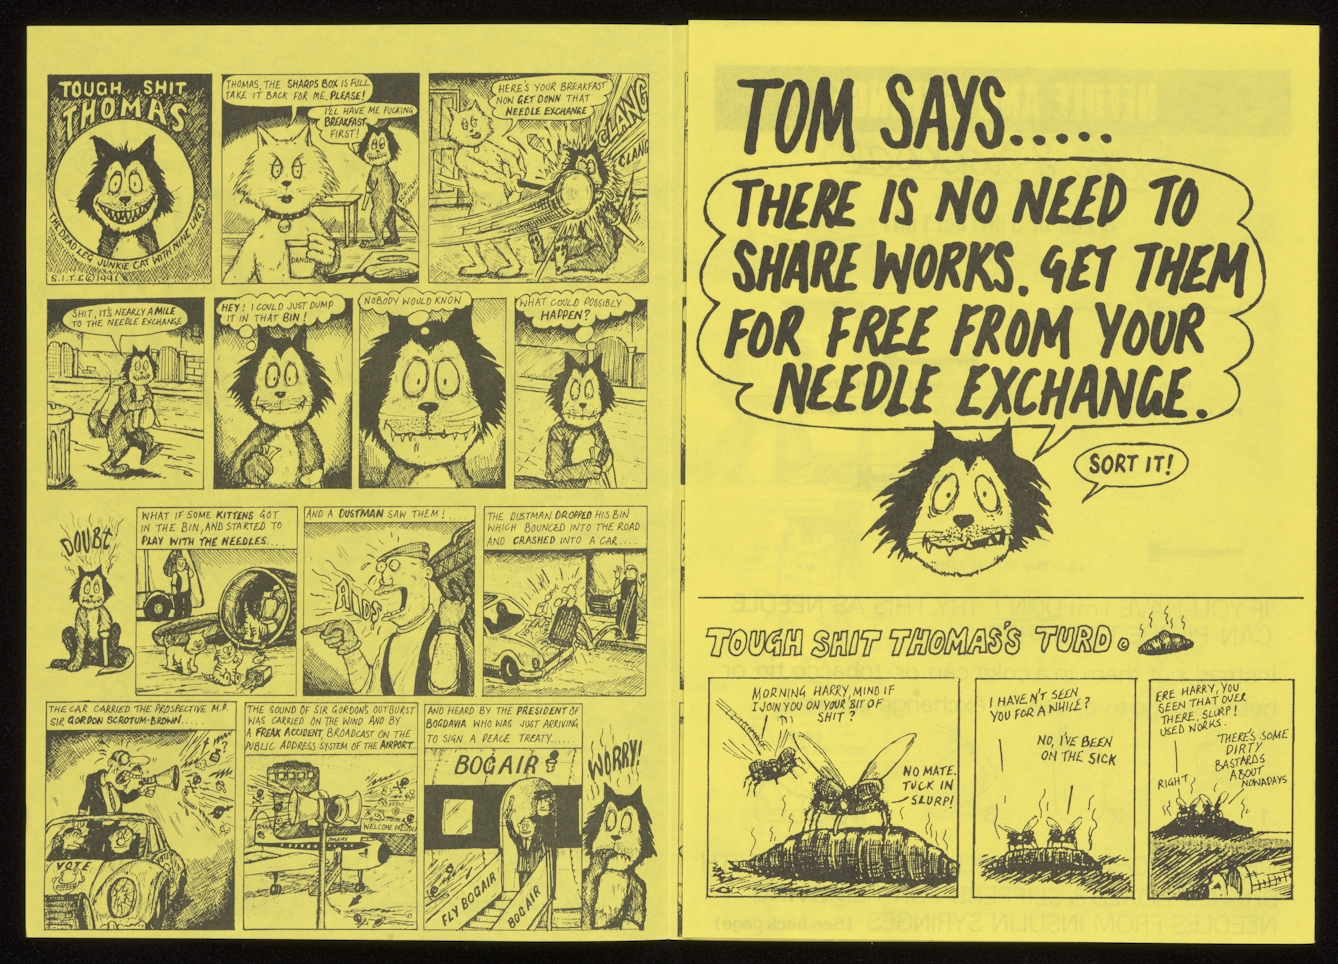 Black text and images on bright yellow paper, a comic strip featuring Tough Shit Thomas, a cat.